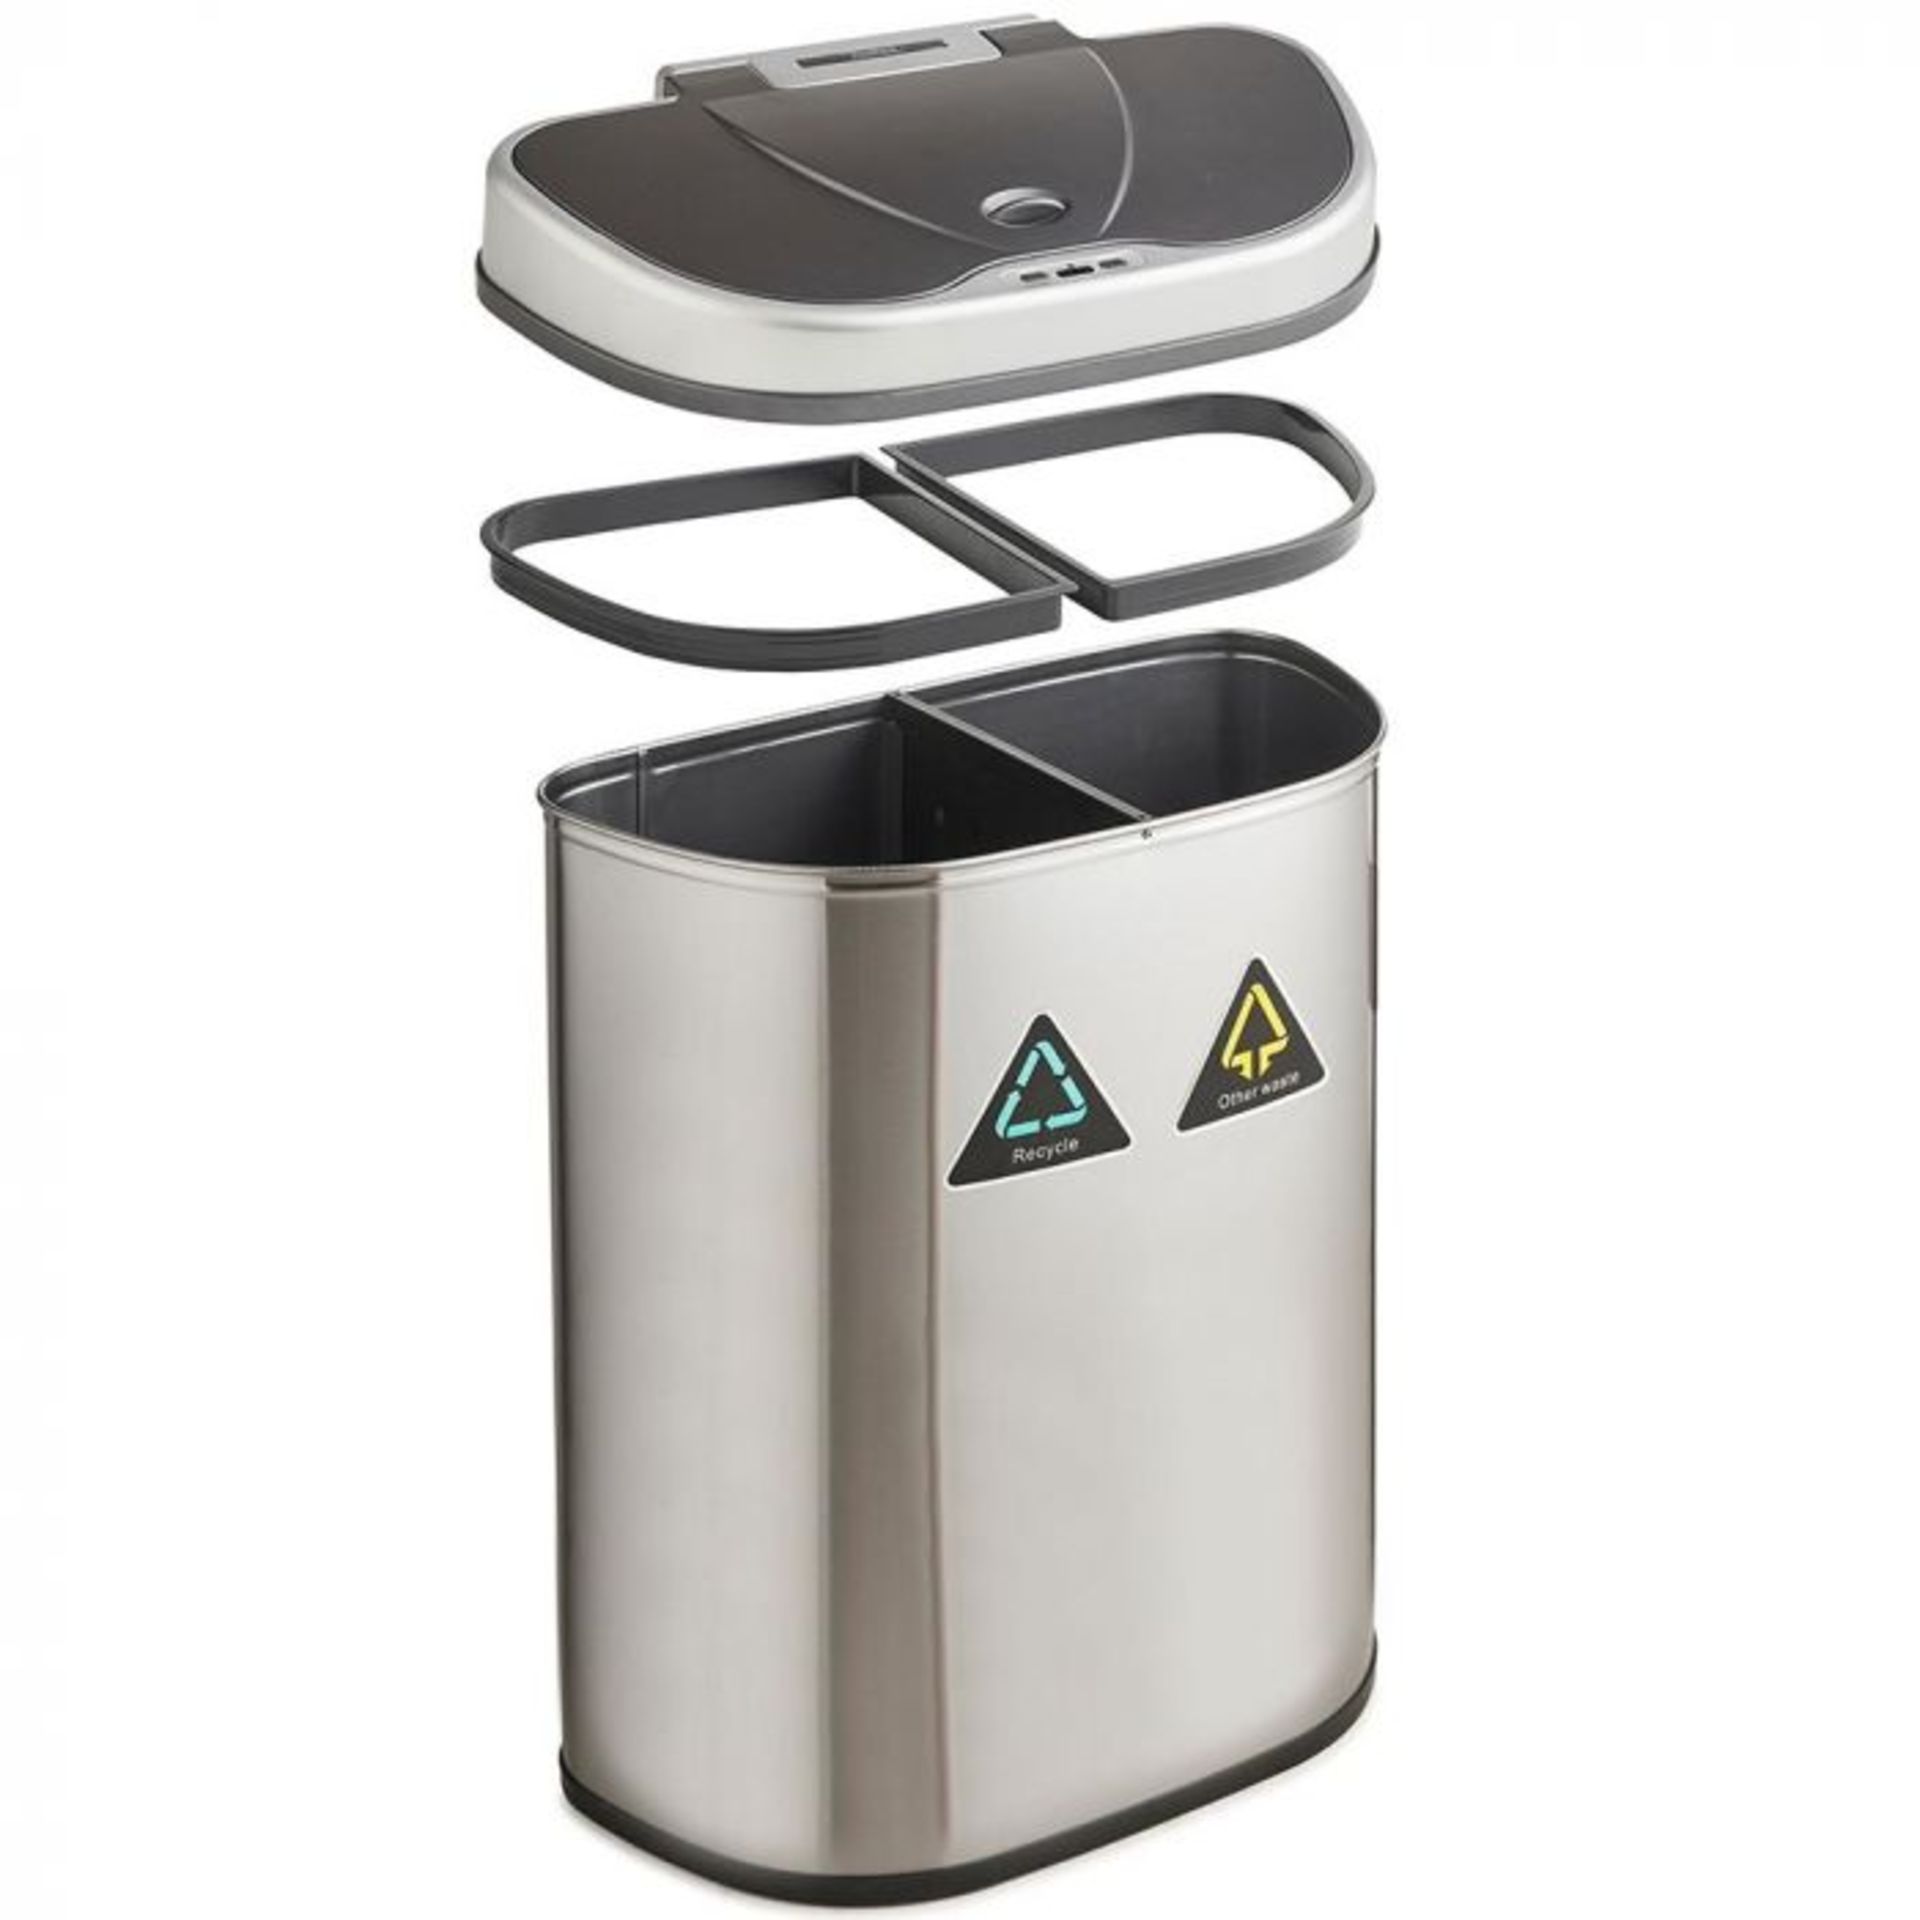 (V75) 70L Recycling Sensor Bin Advanced, hygienic and practical! LED Infrared Sensor opens the... - Image 3 of 4